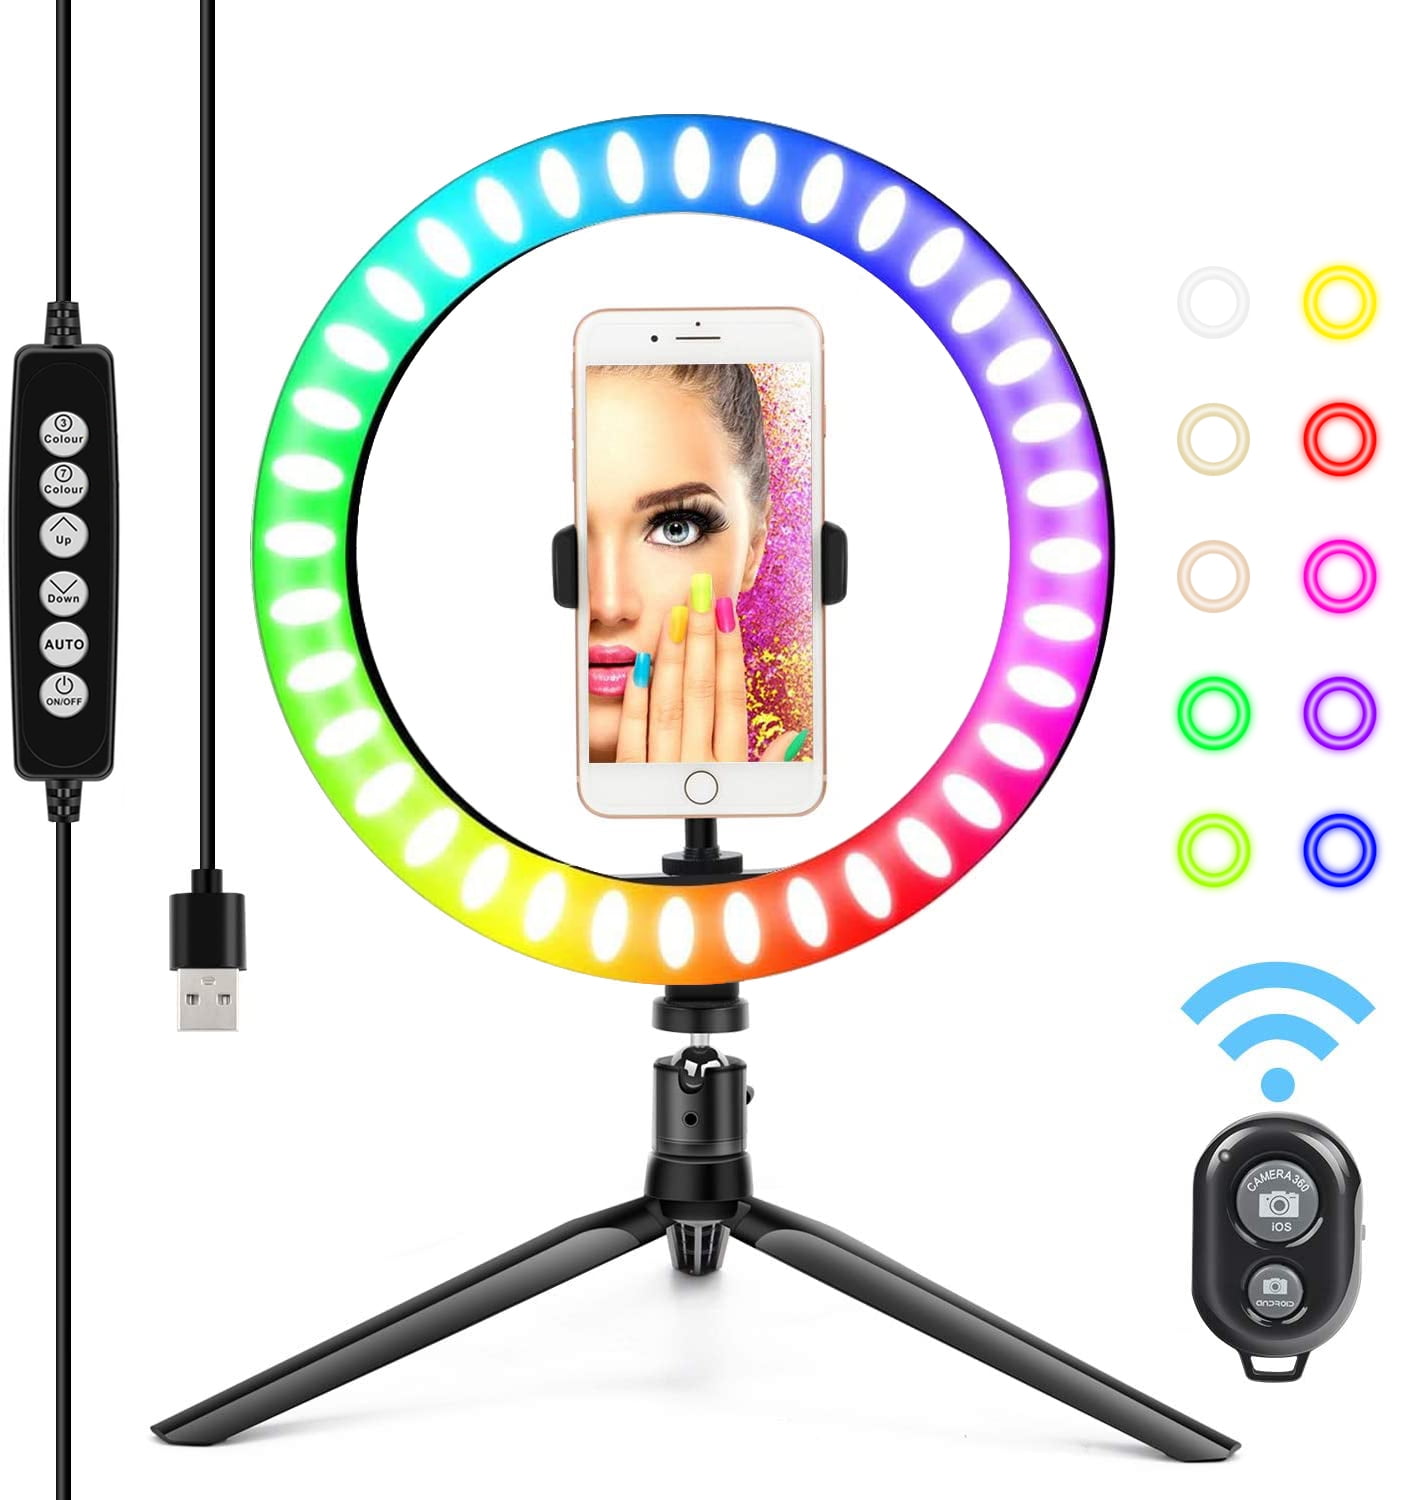 Stand Blu FOSITAN 21-inch LED Ring Light Kit【Upgraded】with 3 Phone Holders 